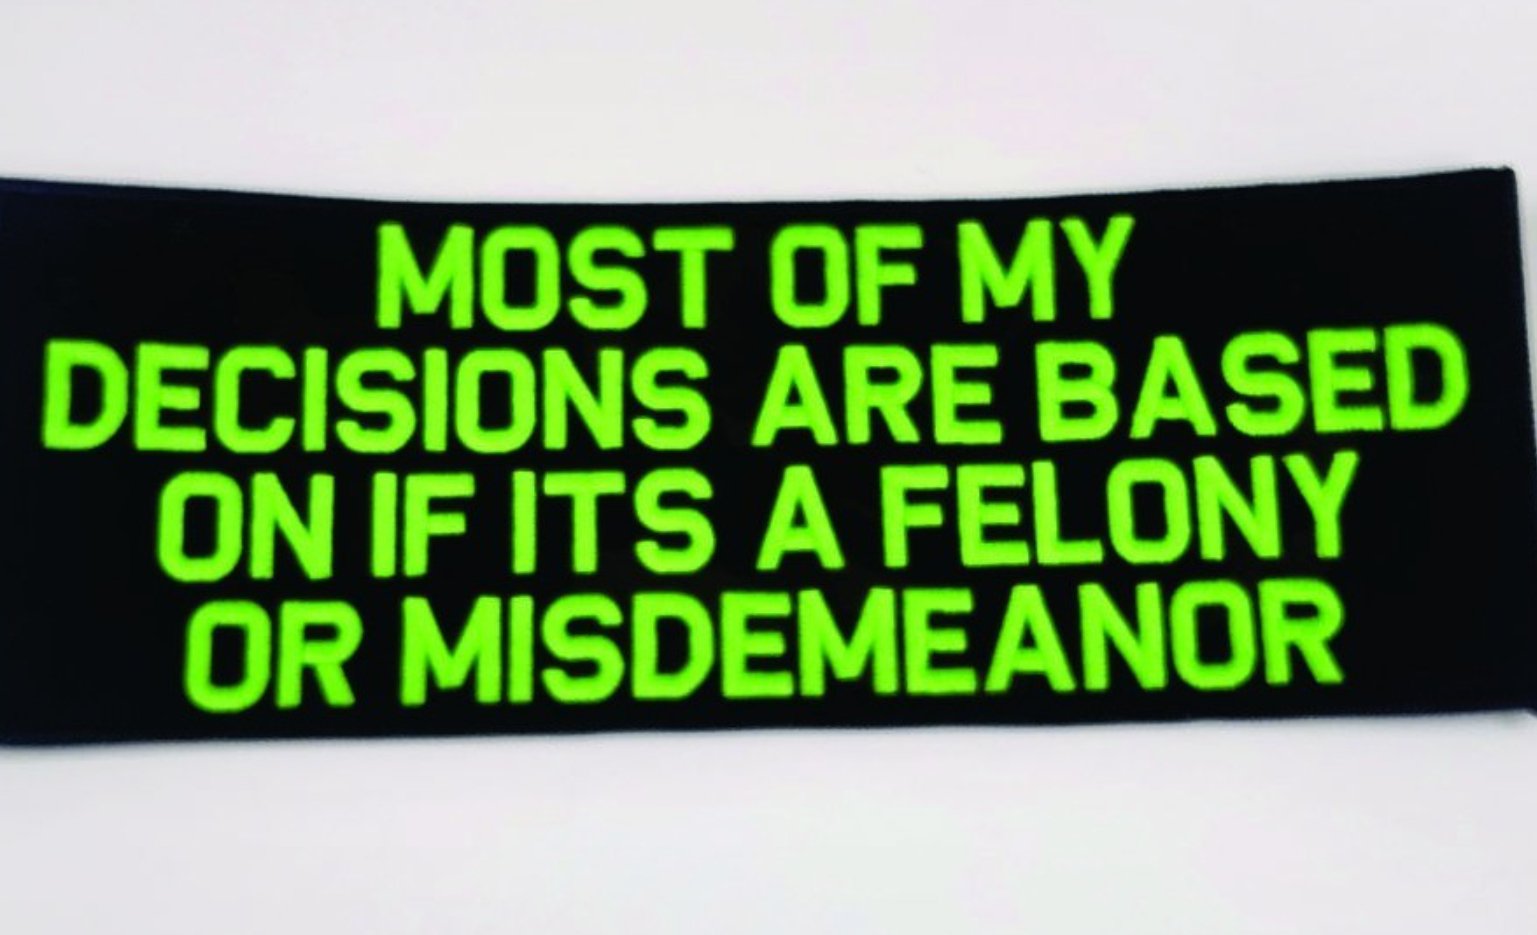 As Seen on Socials - Most Of My Decisions Are Based on If Its a Felony or Misdemeanor - 2x4 Patch - Black w/Neon Green